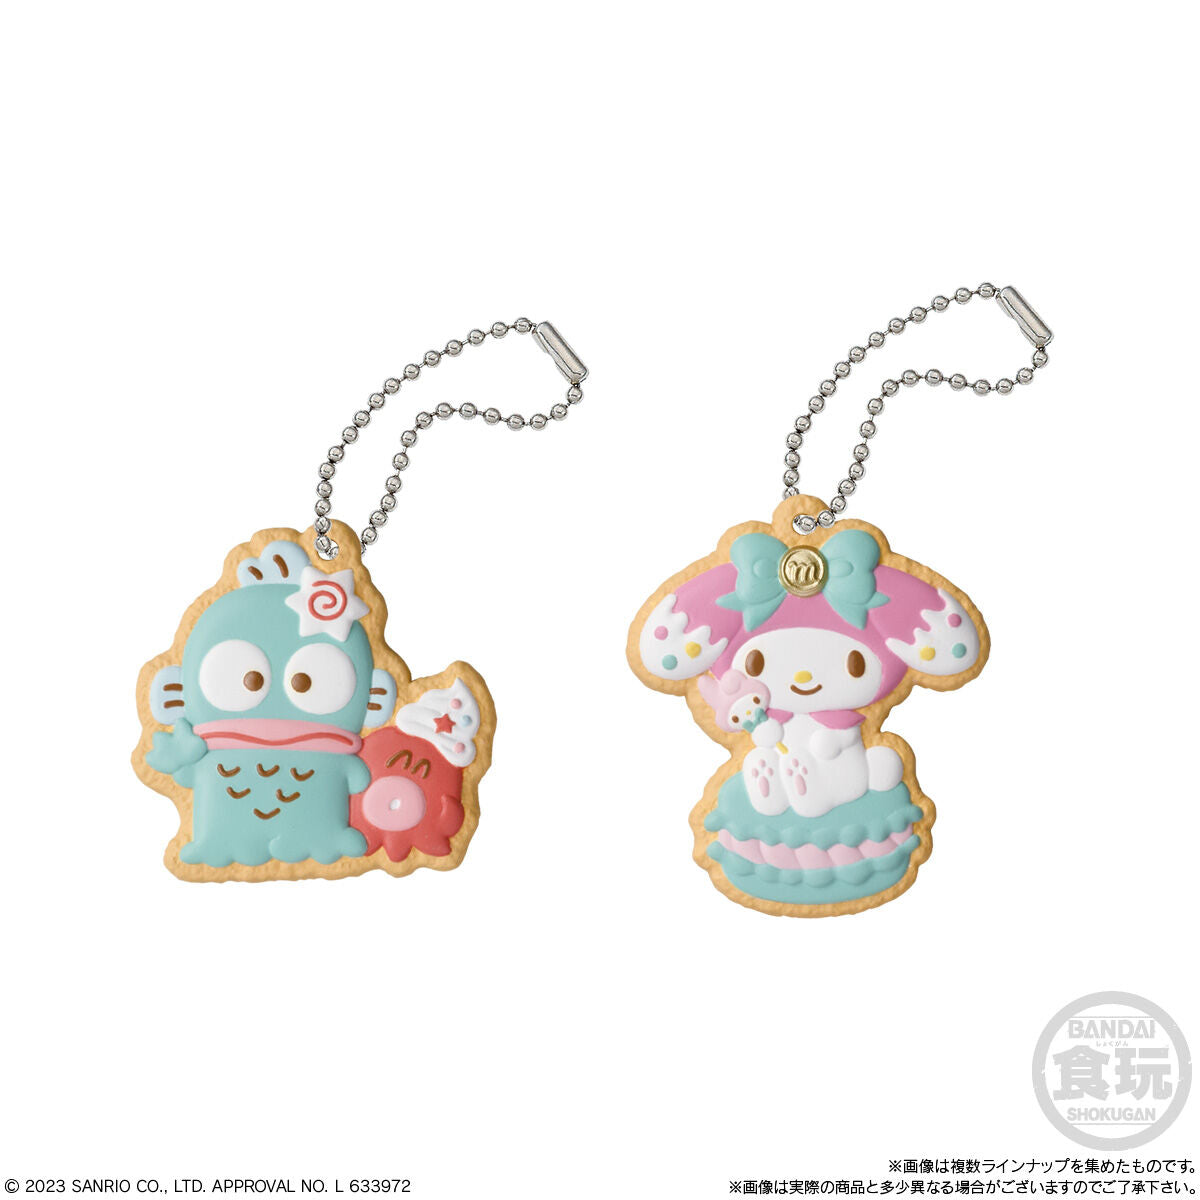 Sanrio Characters Cookie Charmcot-Single Pack (Random)-Bandai-Ace Cards &amp; Collectibles